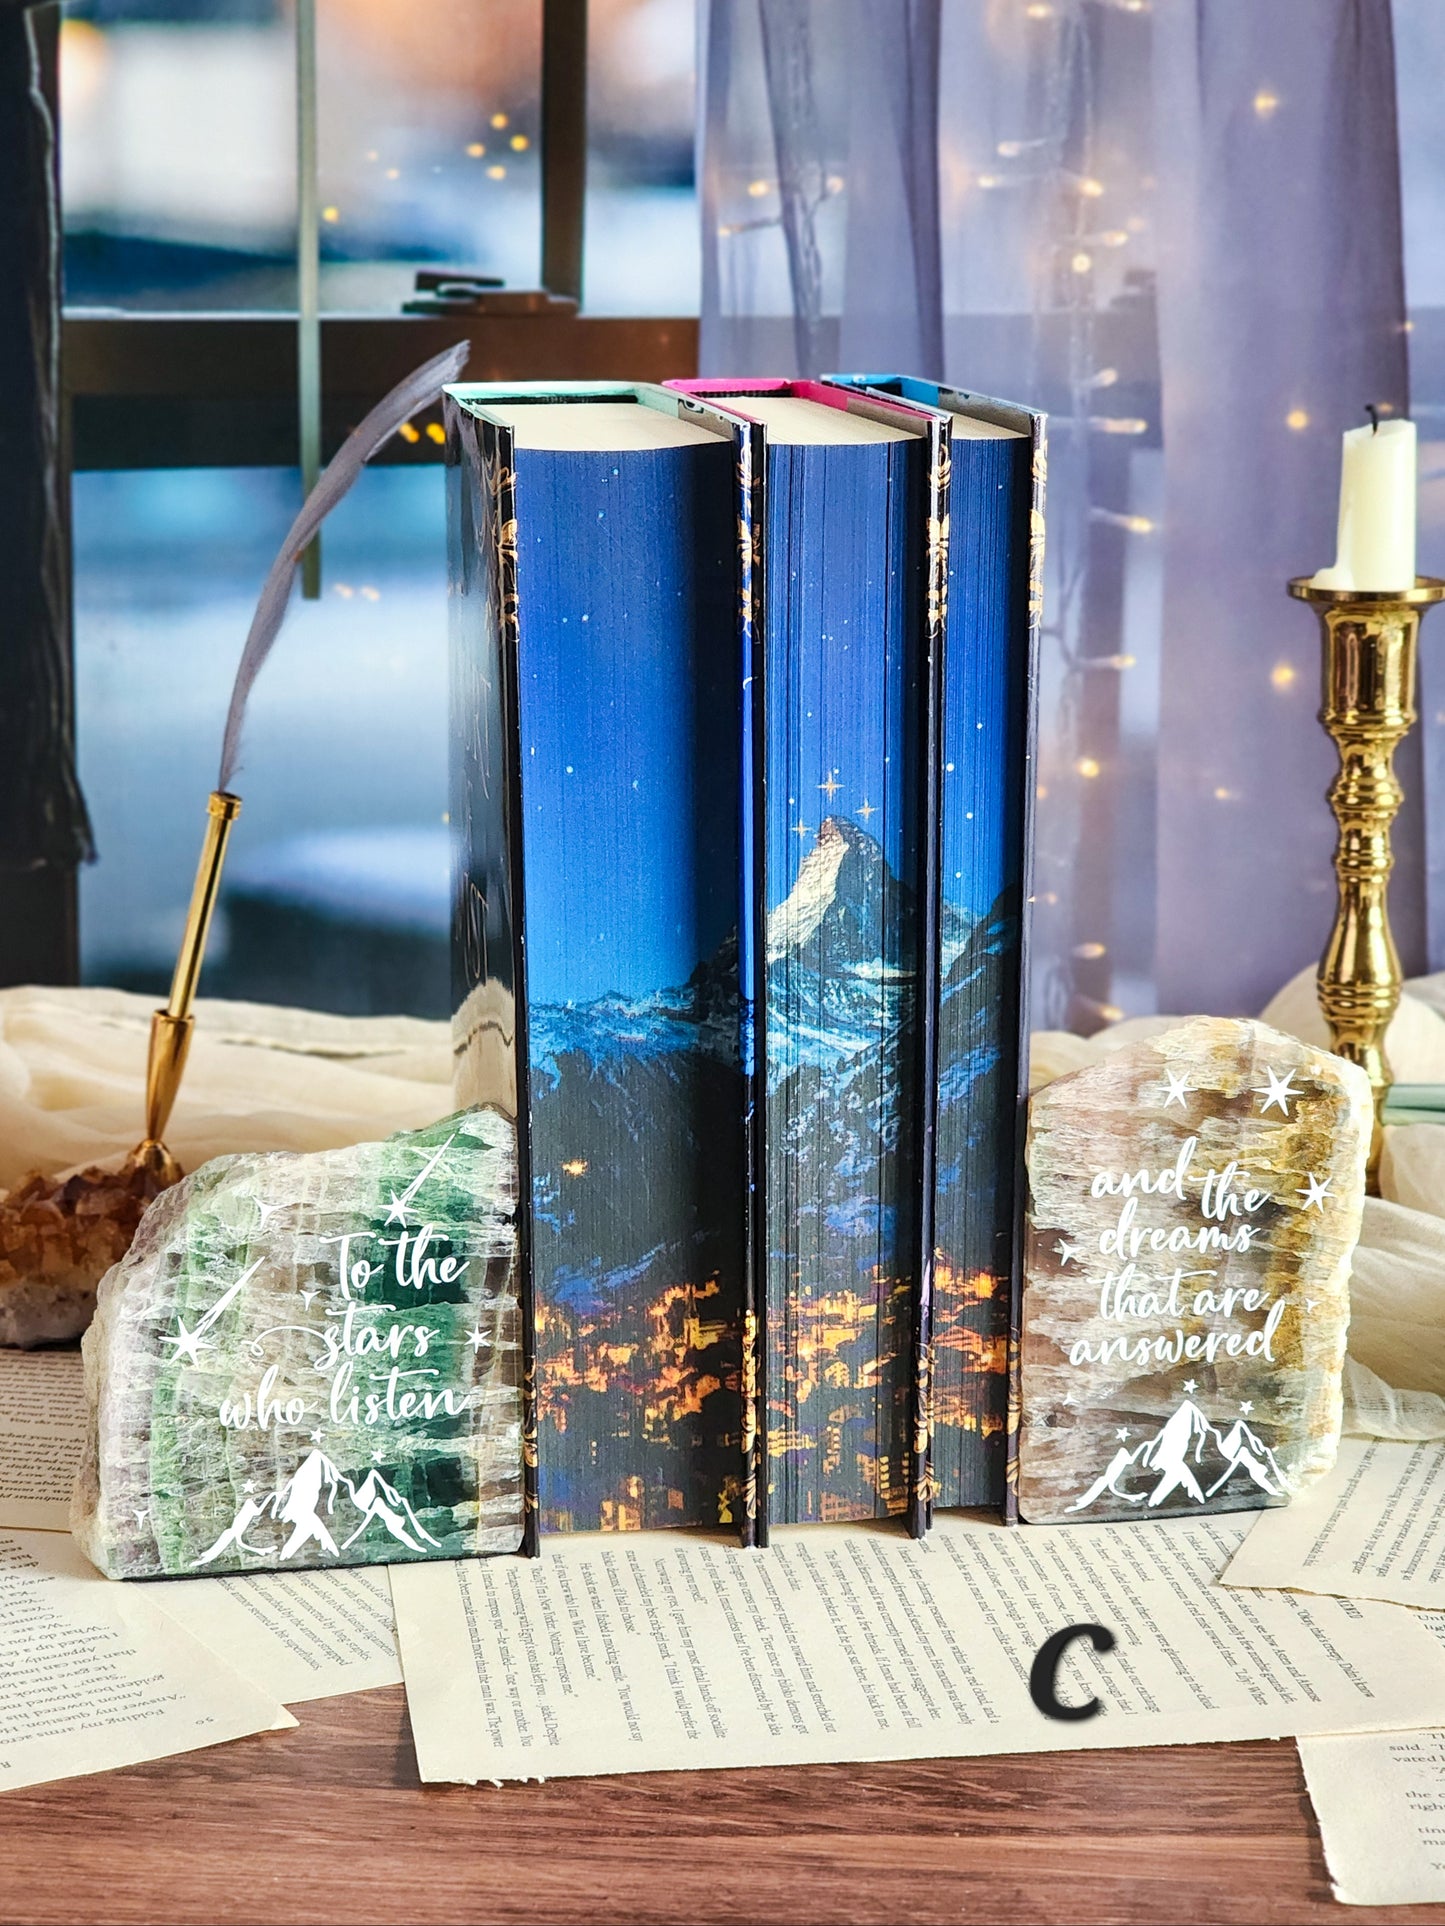 " To the stars who listen" | Rainbow Fluorite Bookends | Sarah J Maas Collection